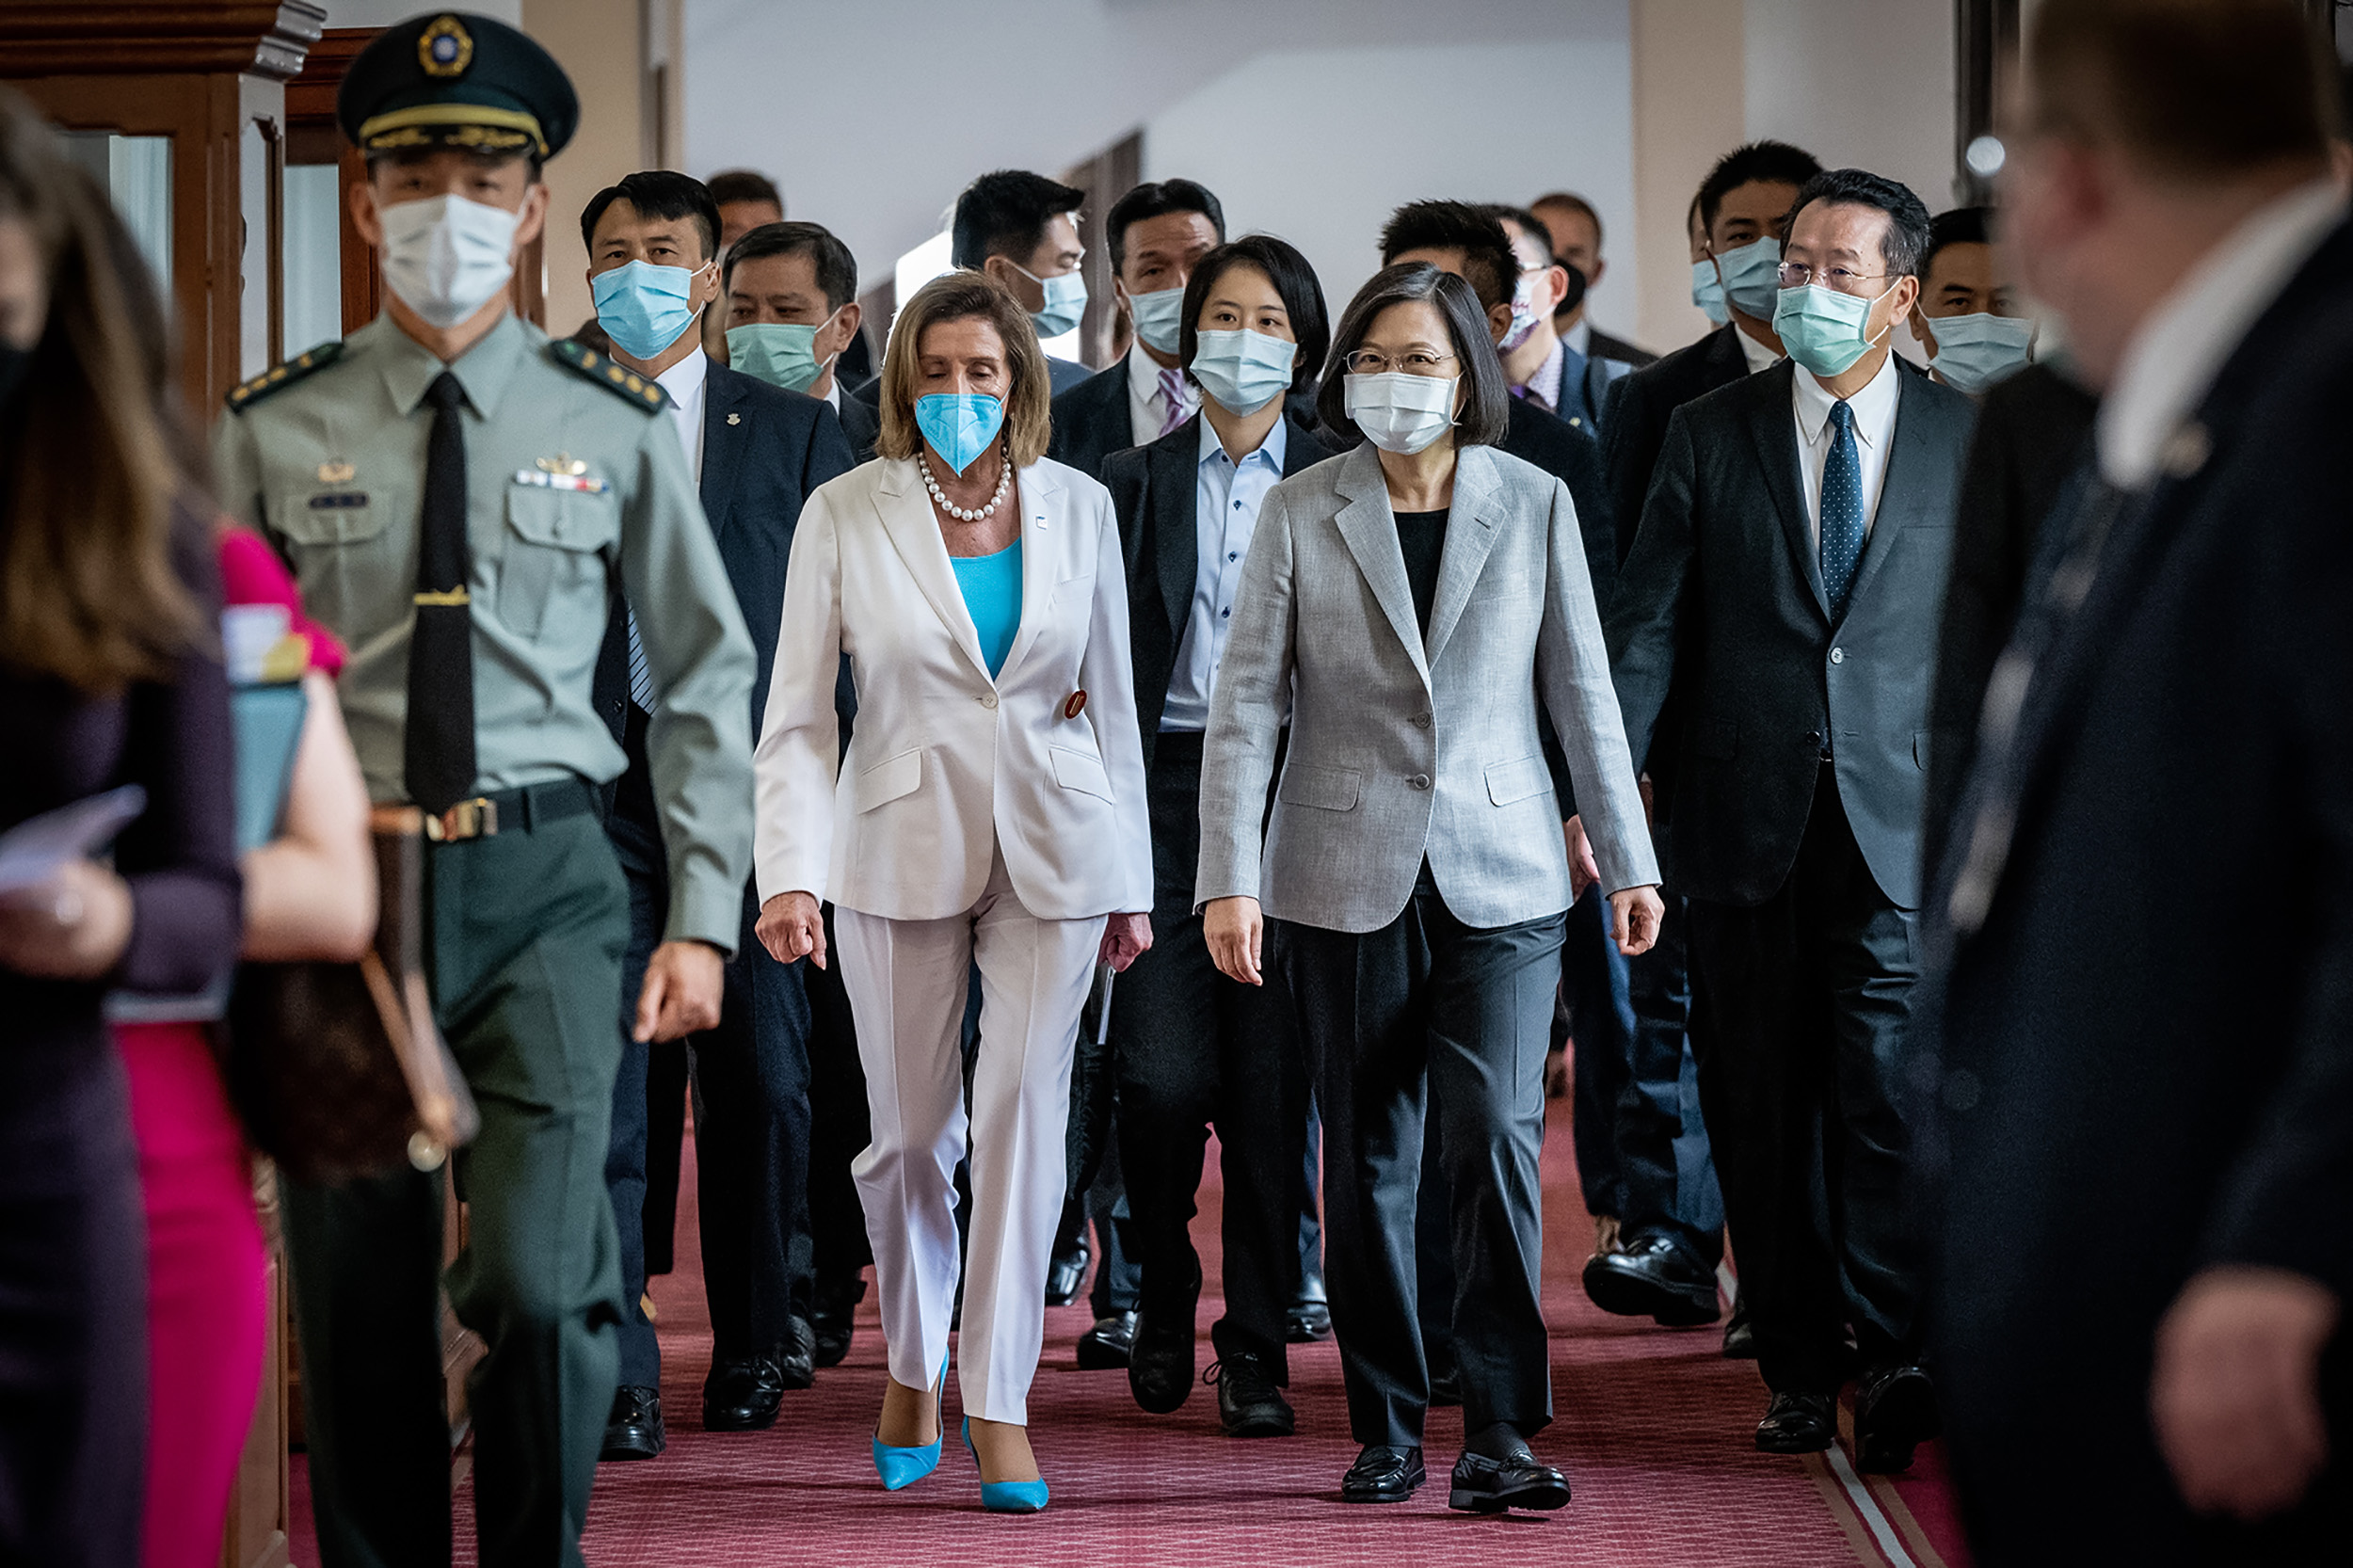 Nancy Pelosi, center left, speaks with Taiwan's President Tsai Ing-wen, center right, after arriving at the president's office on August 3, in Taipei, Taiwan.